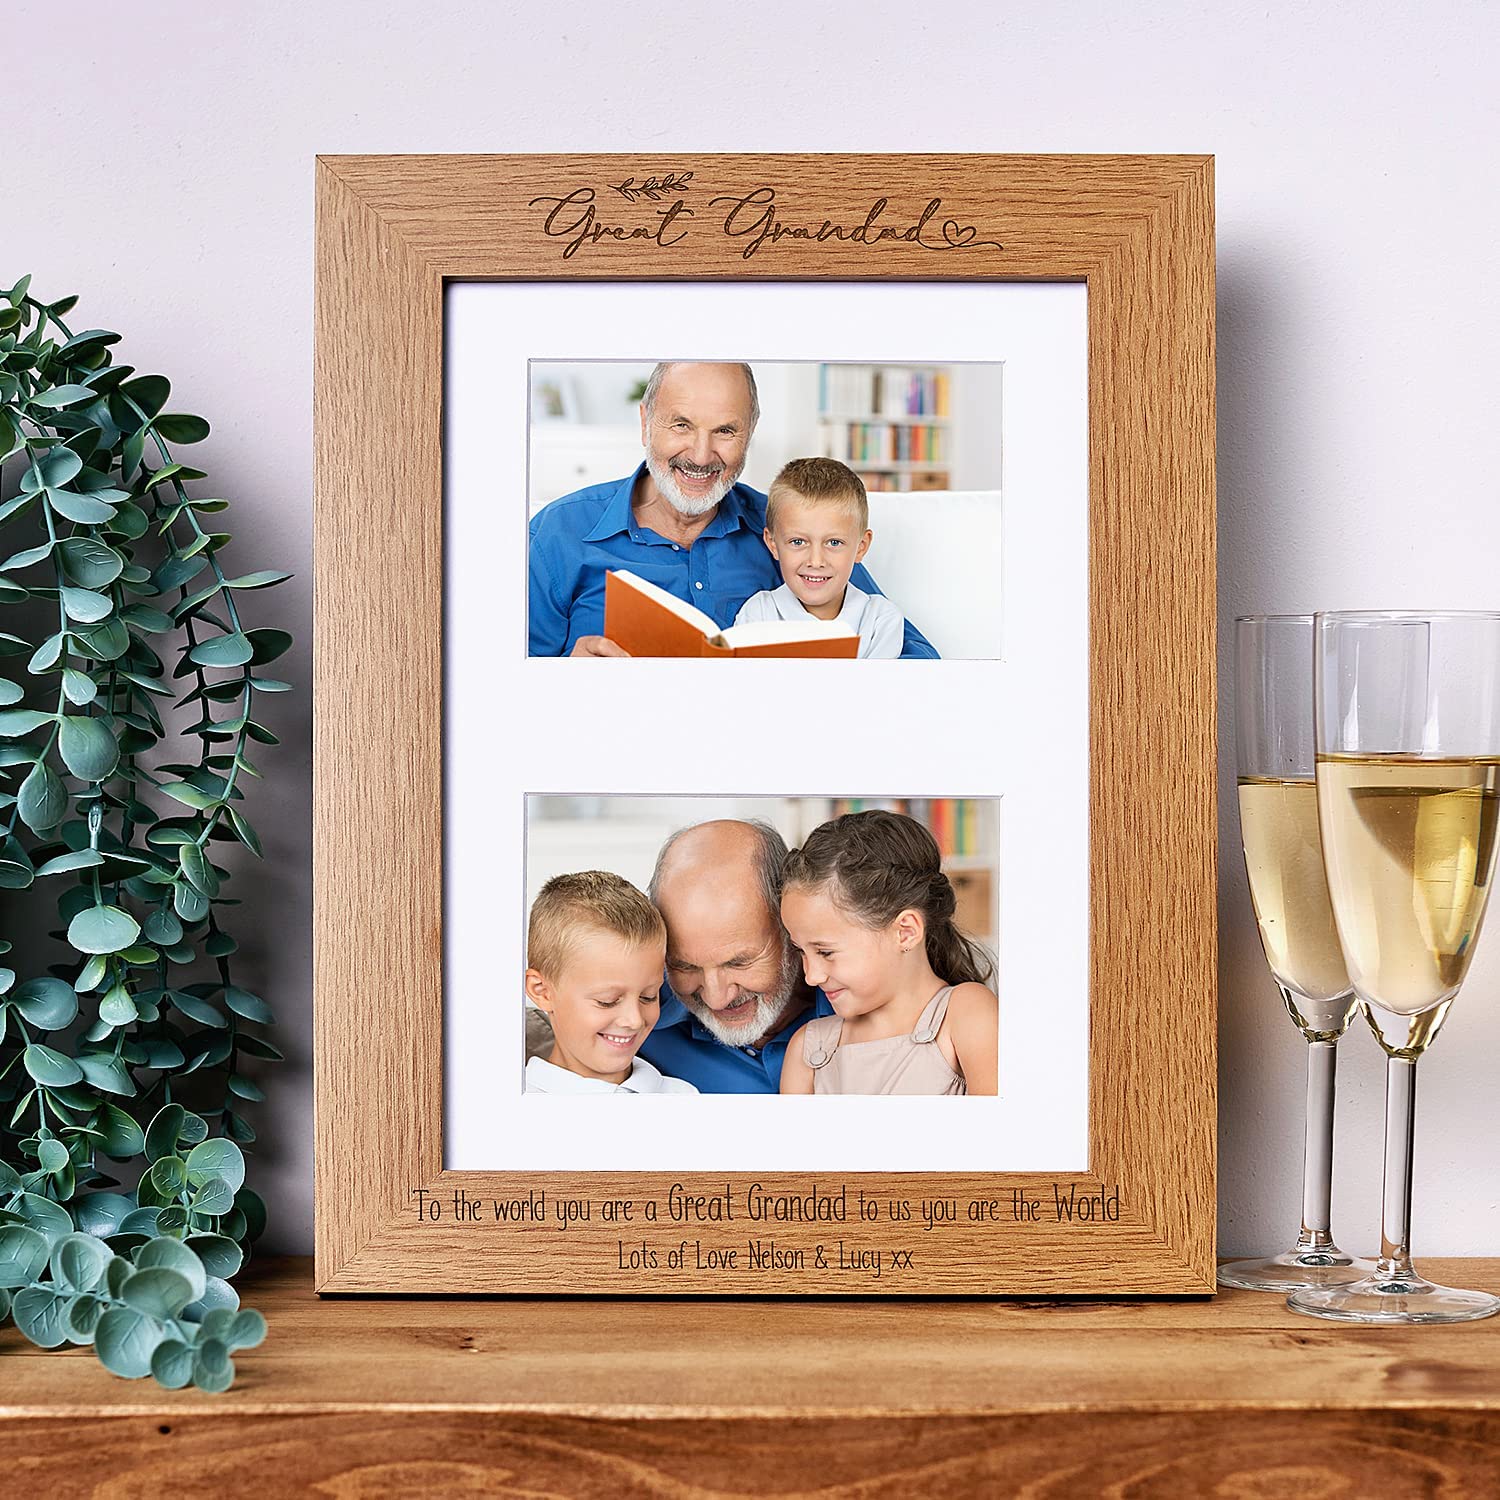 Personalised Great Grandad Wooden Double Photo Frame Gift Landscape